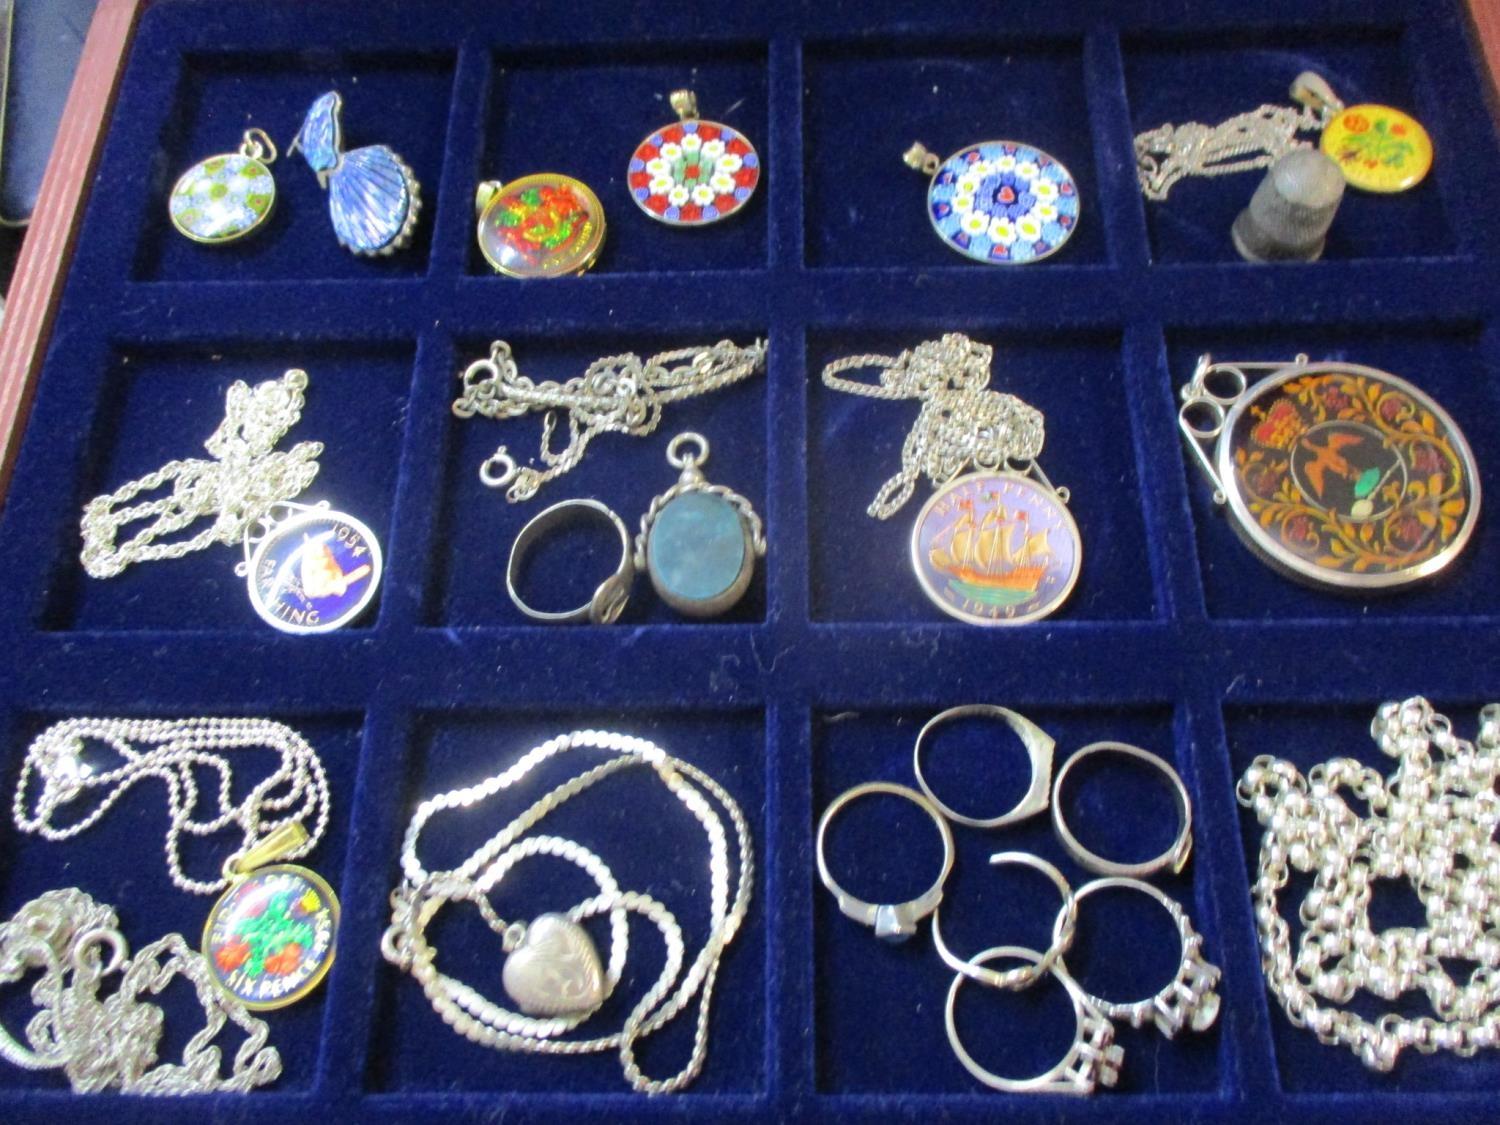 Mille Fleurie pendants, coins pendants, mixed silver items stamped 925 and white metal items